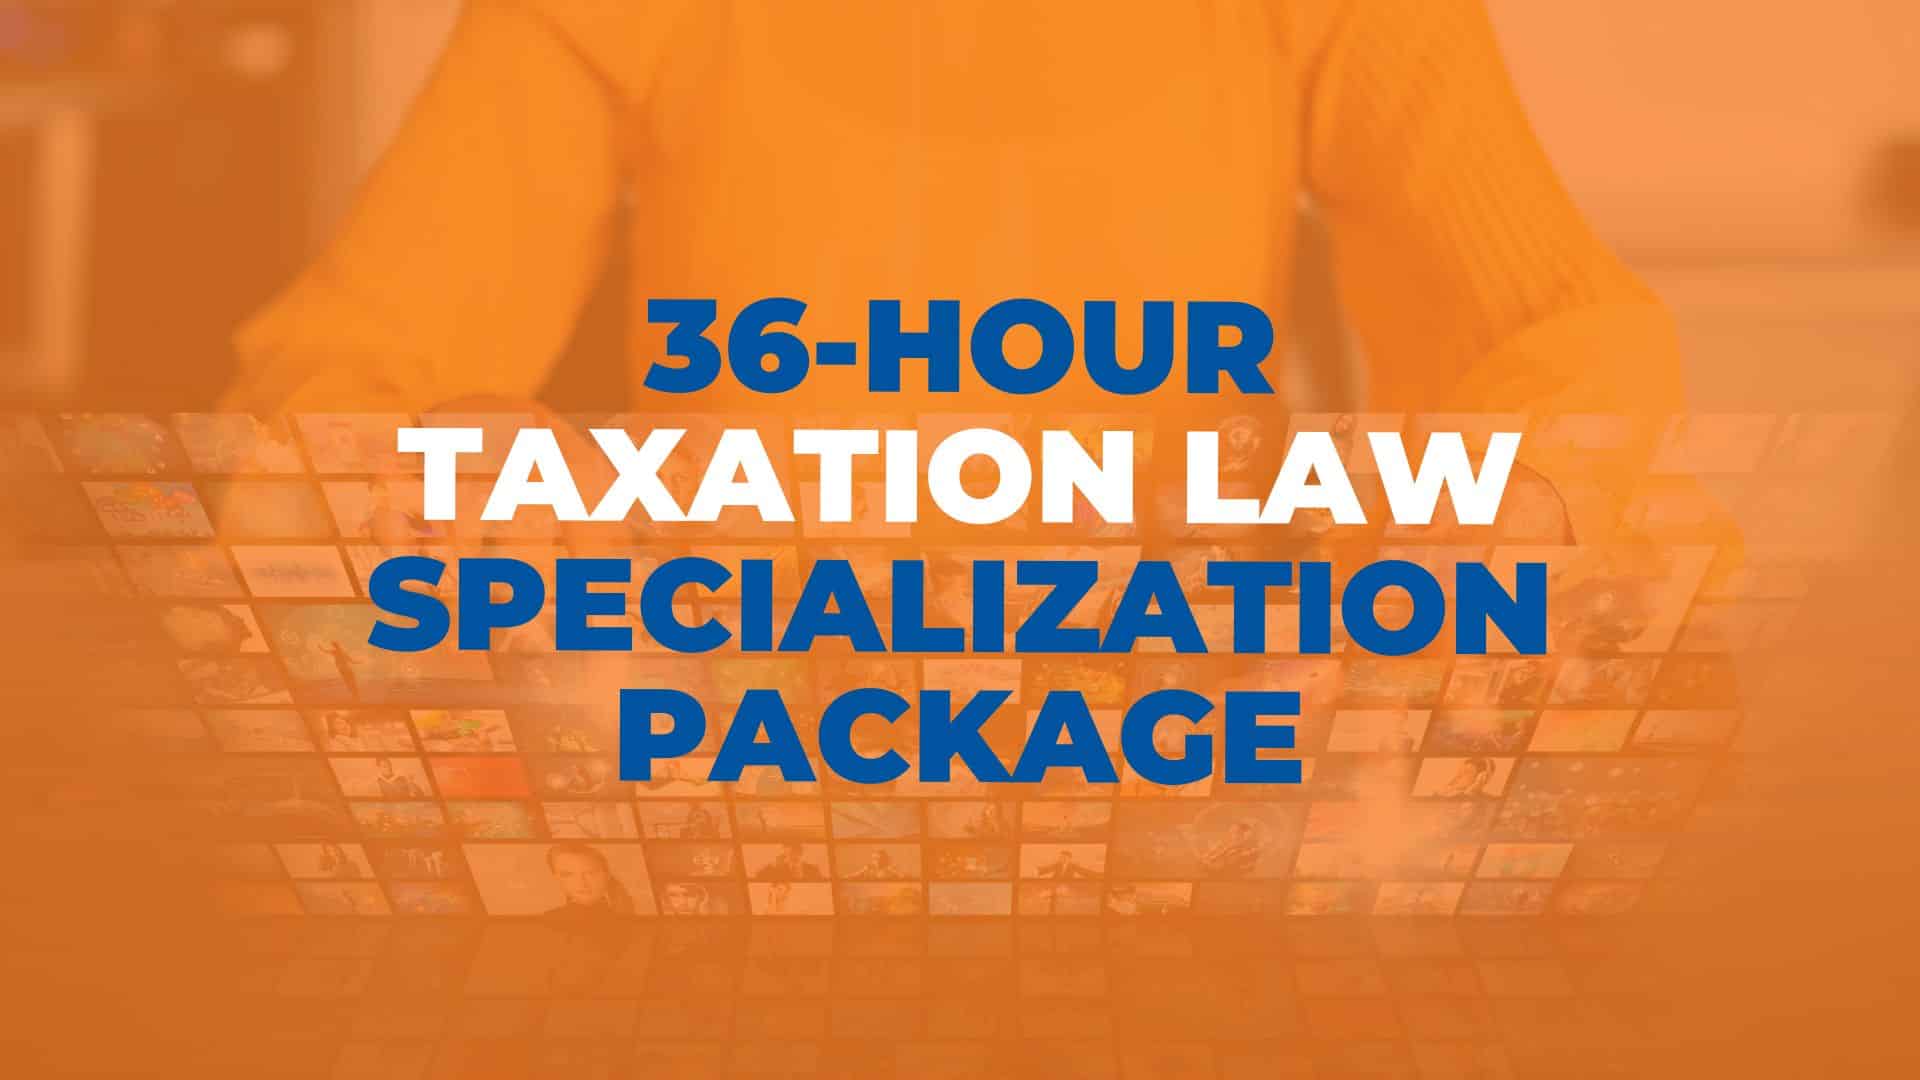 36-Hour Taxation Law Specialization Package